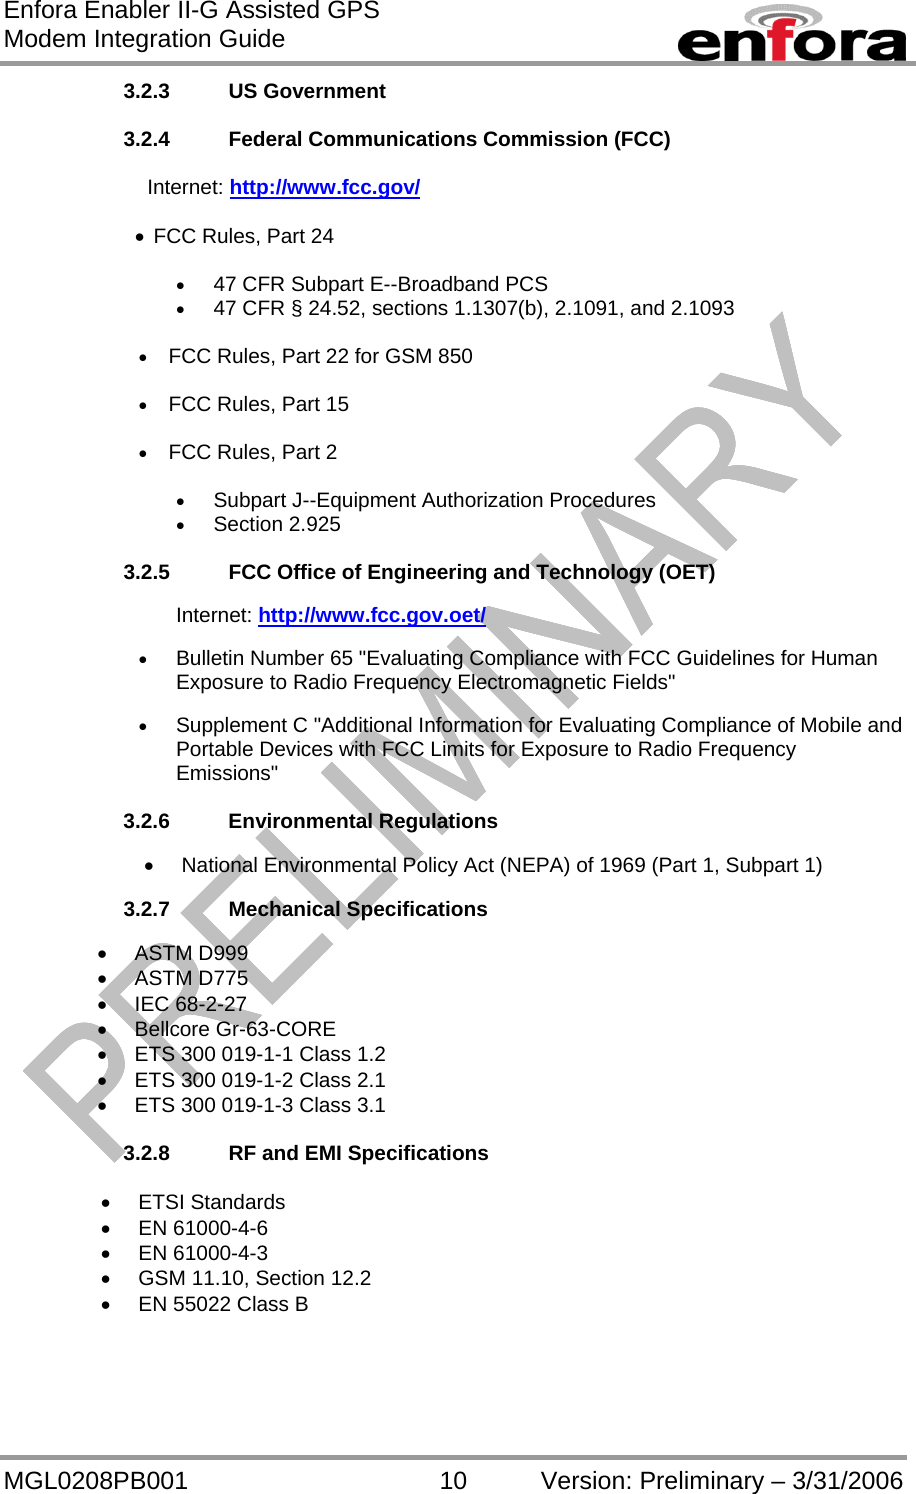 Enfora Enabler II-G Assisted GPS Modem Integration Guide MGL0208PB001 10 Version: Preliminary – 3/31/2006 3.2.3 US Government  3.2.4  Federal Communications Commission (FCC)                 Internet: http://www.fcc.gov/  •  FCC Rules, Part 24   •  47 CFR Subpart E--Broadband PCS •  47 CFR § 24.52, sections 1.1307(b), 2.1091, and 2.1093  •  FCC Rules, Part 22 for GSM 850  •  FCC Rules, Part 15  •  FCC Rules, Part 2  •  Subpart J--Equipment Authorization Procedures •  Section 2.925  3.2.5  FCC Office of Engineering and Technology (OET)  Internet: http://www.fcc.gov.oet/  •  Bulletin Number 65 &quot;Evaluating Compliance with FCC Guidelines for Human Exposure to Radio Frequency Electromagnetic Fields&quot;  •  Supplement C &quot;Additional Information for Evaluating Compliance of Mobile and Portable Devices with FCC Limits for Exposure to Radio Frequency Emissions&quot;  3.2.6 Environmental Regulations  •  National Environmental Policy Act (NEPA) of 1969 (Part 1, Subpart 1)  3.2.7 Mechanical Specifications  •  ASTM D999 •  ASTM D775 •  IEC 68-2-27 •  Bellcore Gr-63-CORE •  ETS 300 019-1-1 Class 1.2 •  ETS 300 019-1-2 Class 2.1 •  ETS 300 019-1-3 Class 3.1  3.2.8  RF and EMI Specifications  •  ETSI Standards •  EN 61000-4-6 •  EN 61000-4-3 •  GSM 11.10, Section 12.2 •  EN 55022 Class B   